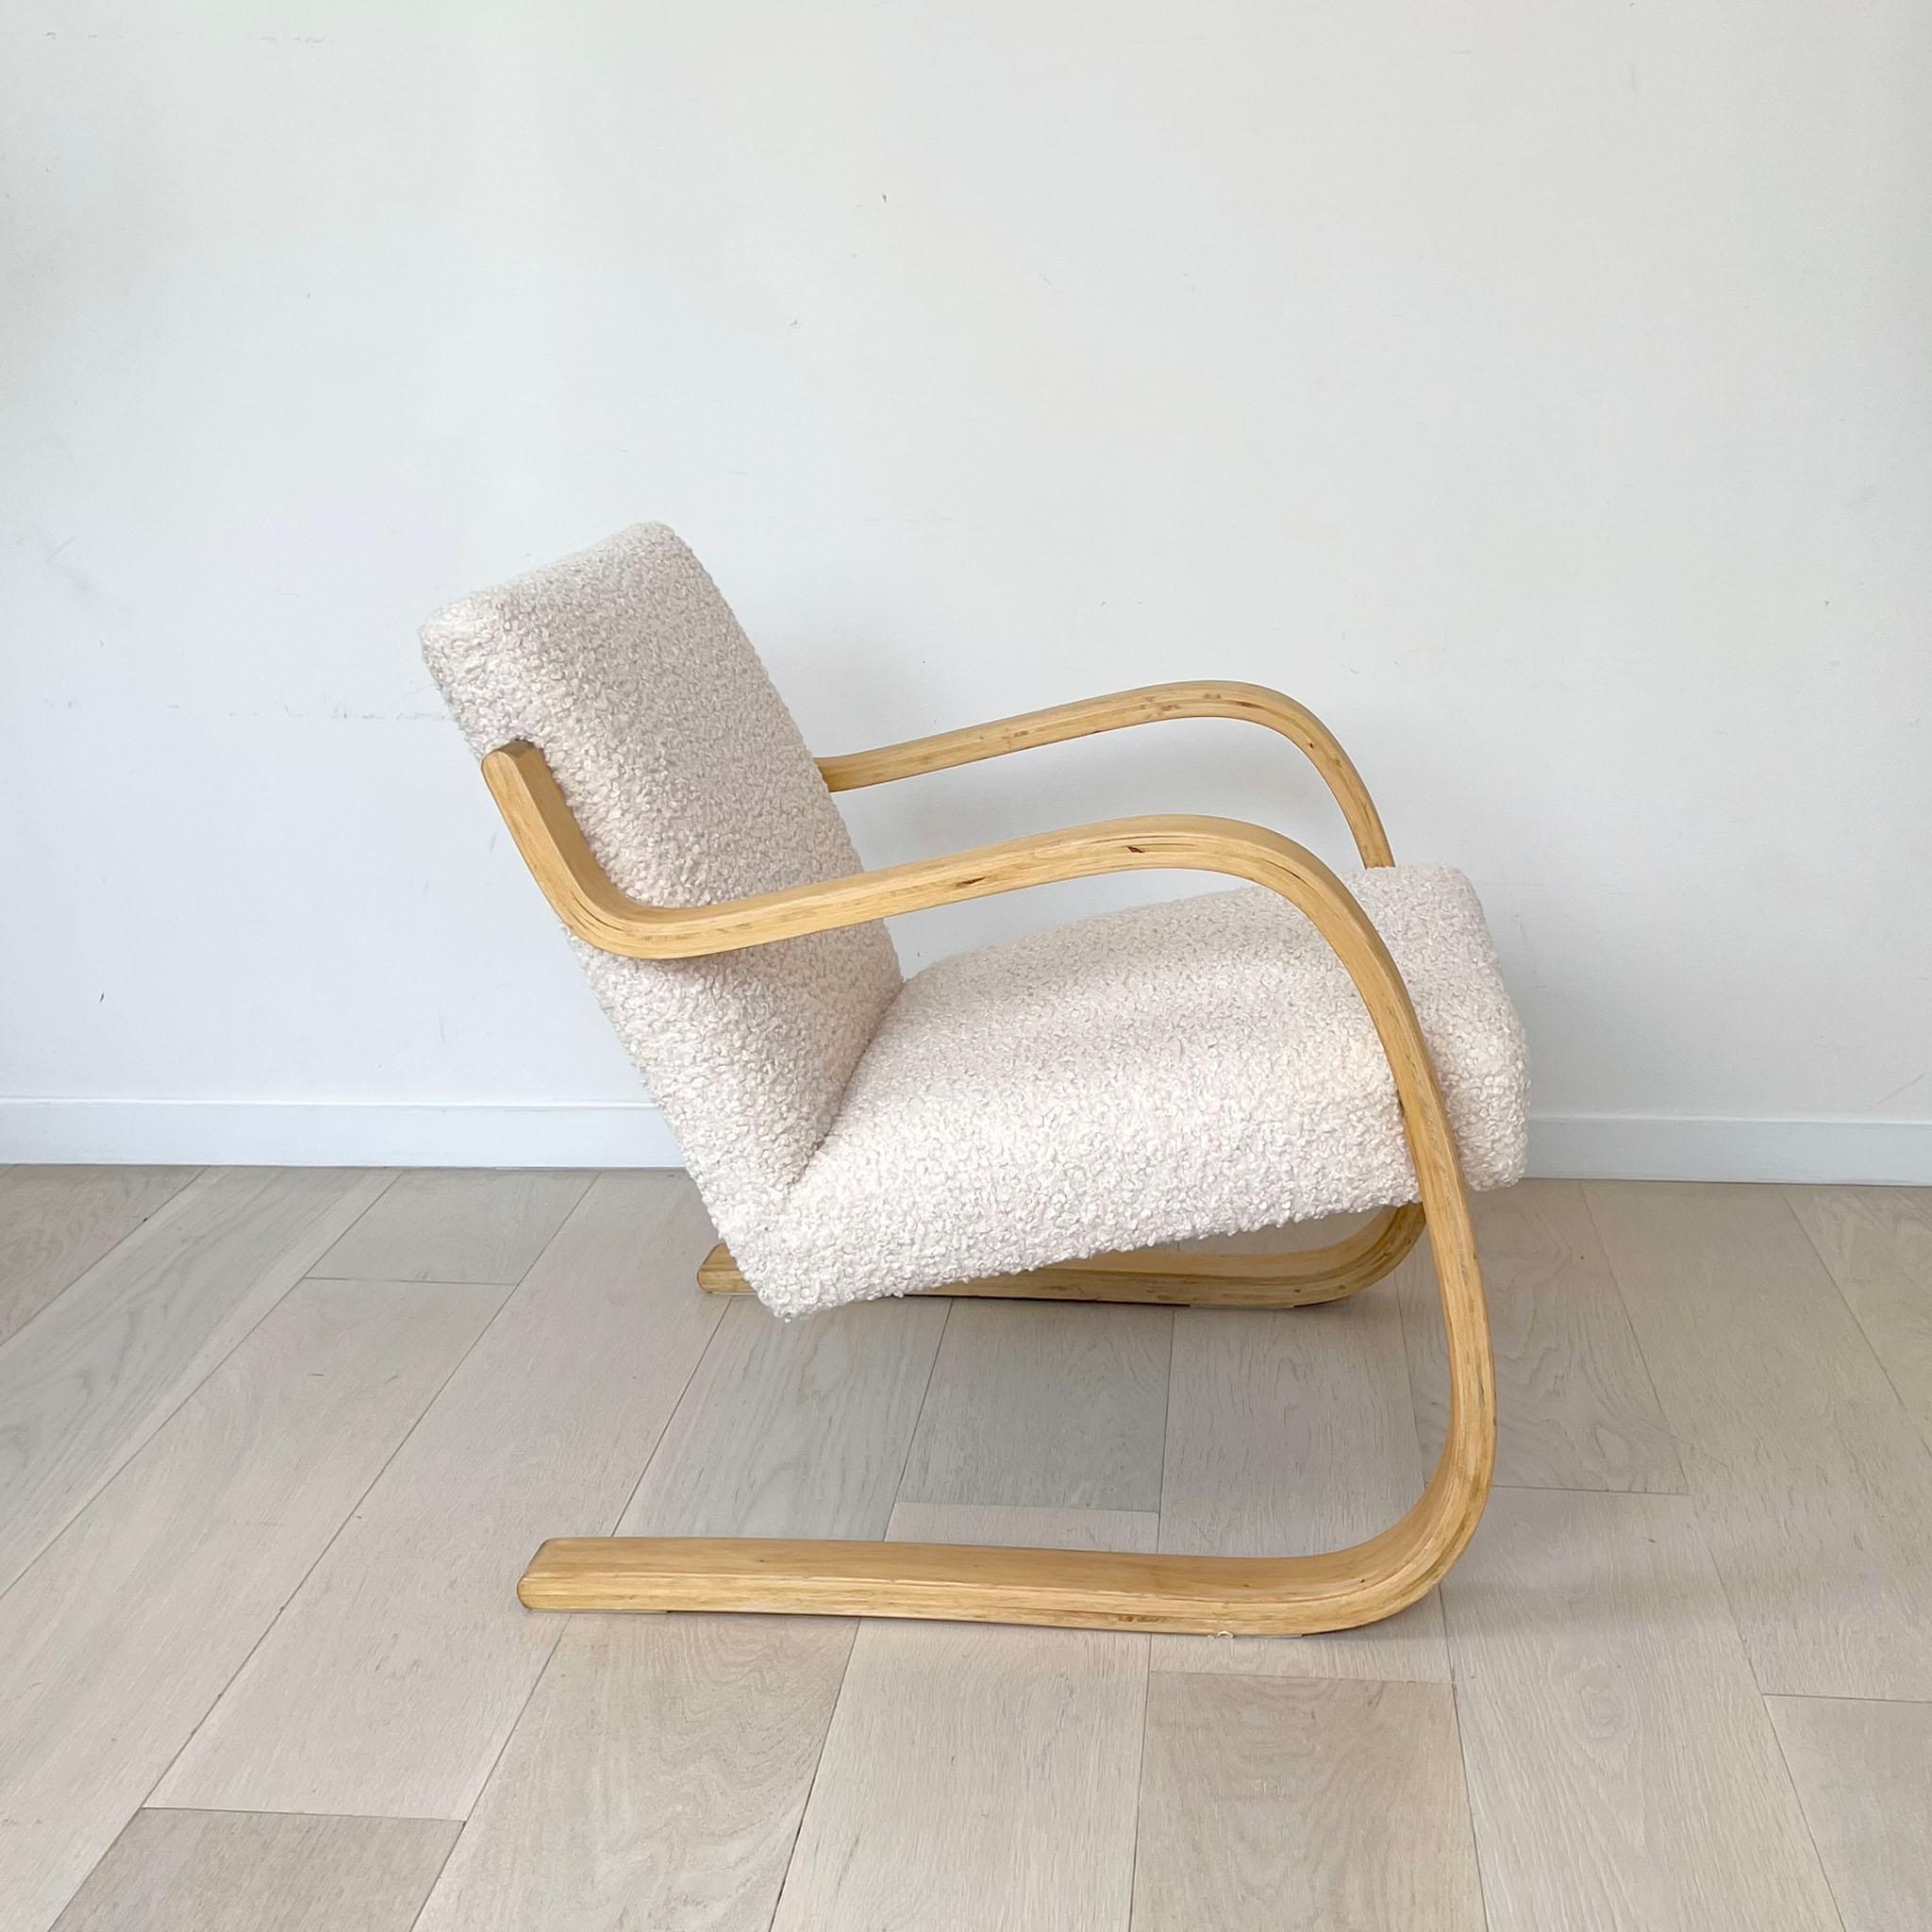 Mid-Century Modern 1960s, Alvar Aalto Birch Bentwood Chair Upholstered in Fluffy Boucle Shearling